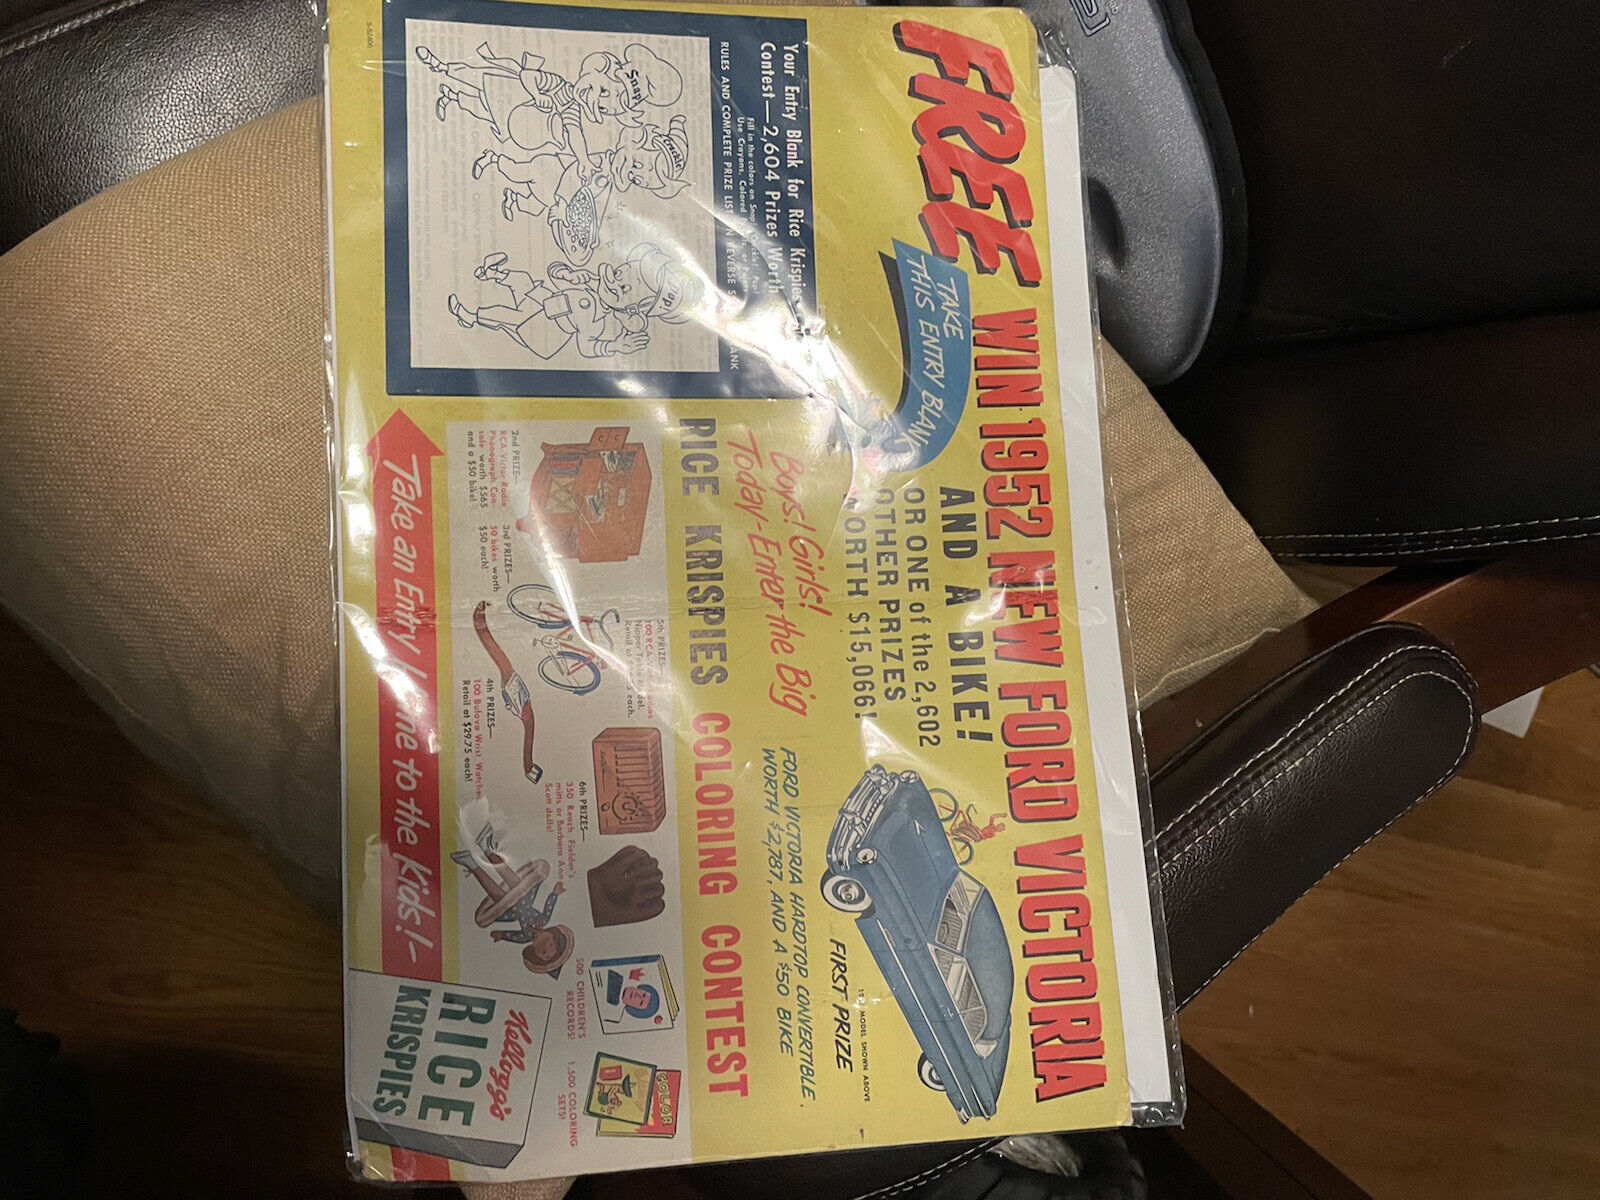 1952 cerial sweepstakes for a ford display with tear off coupon